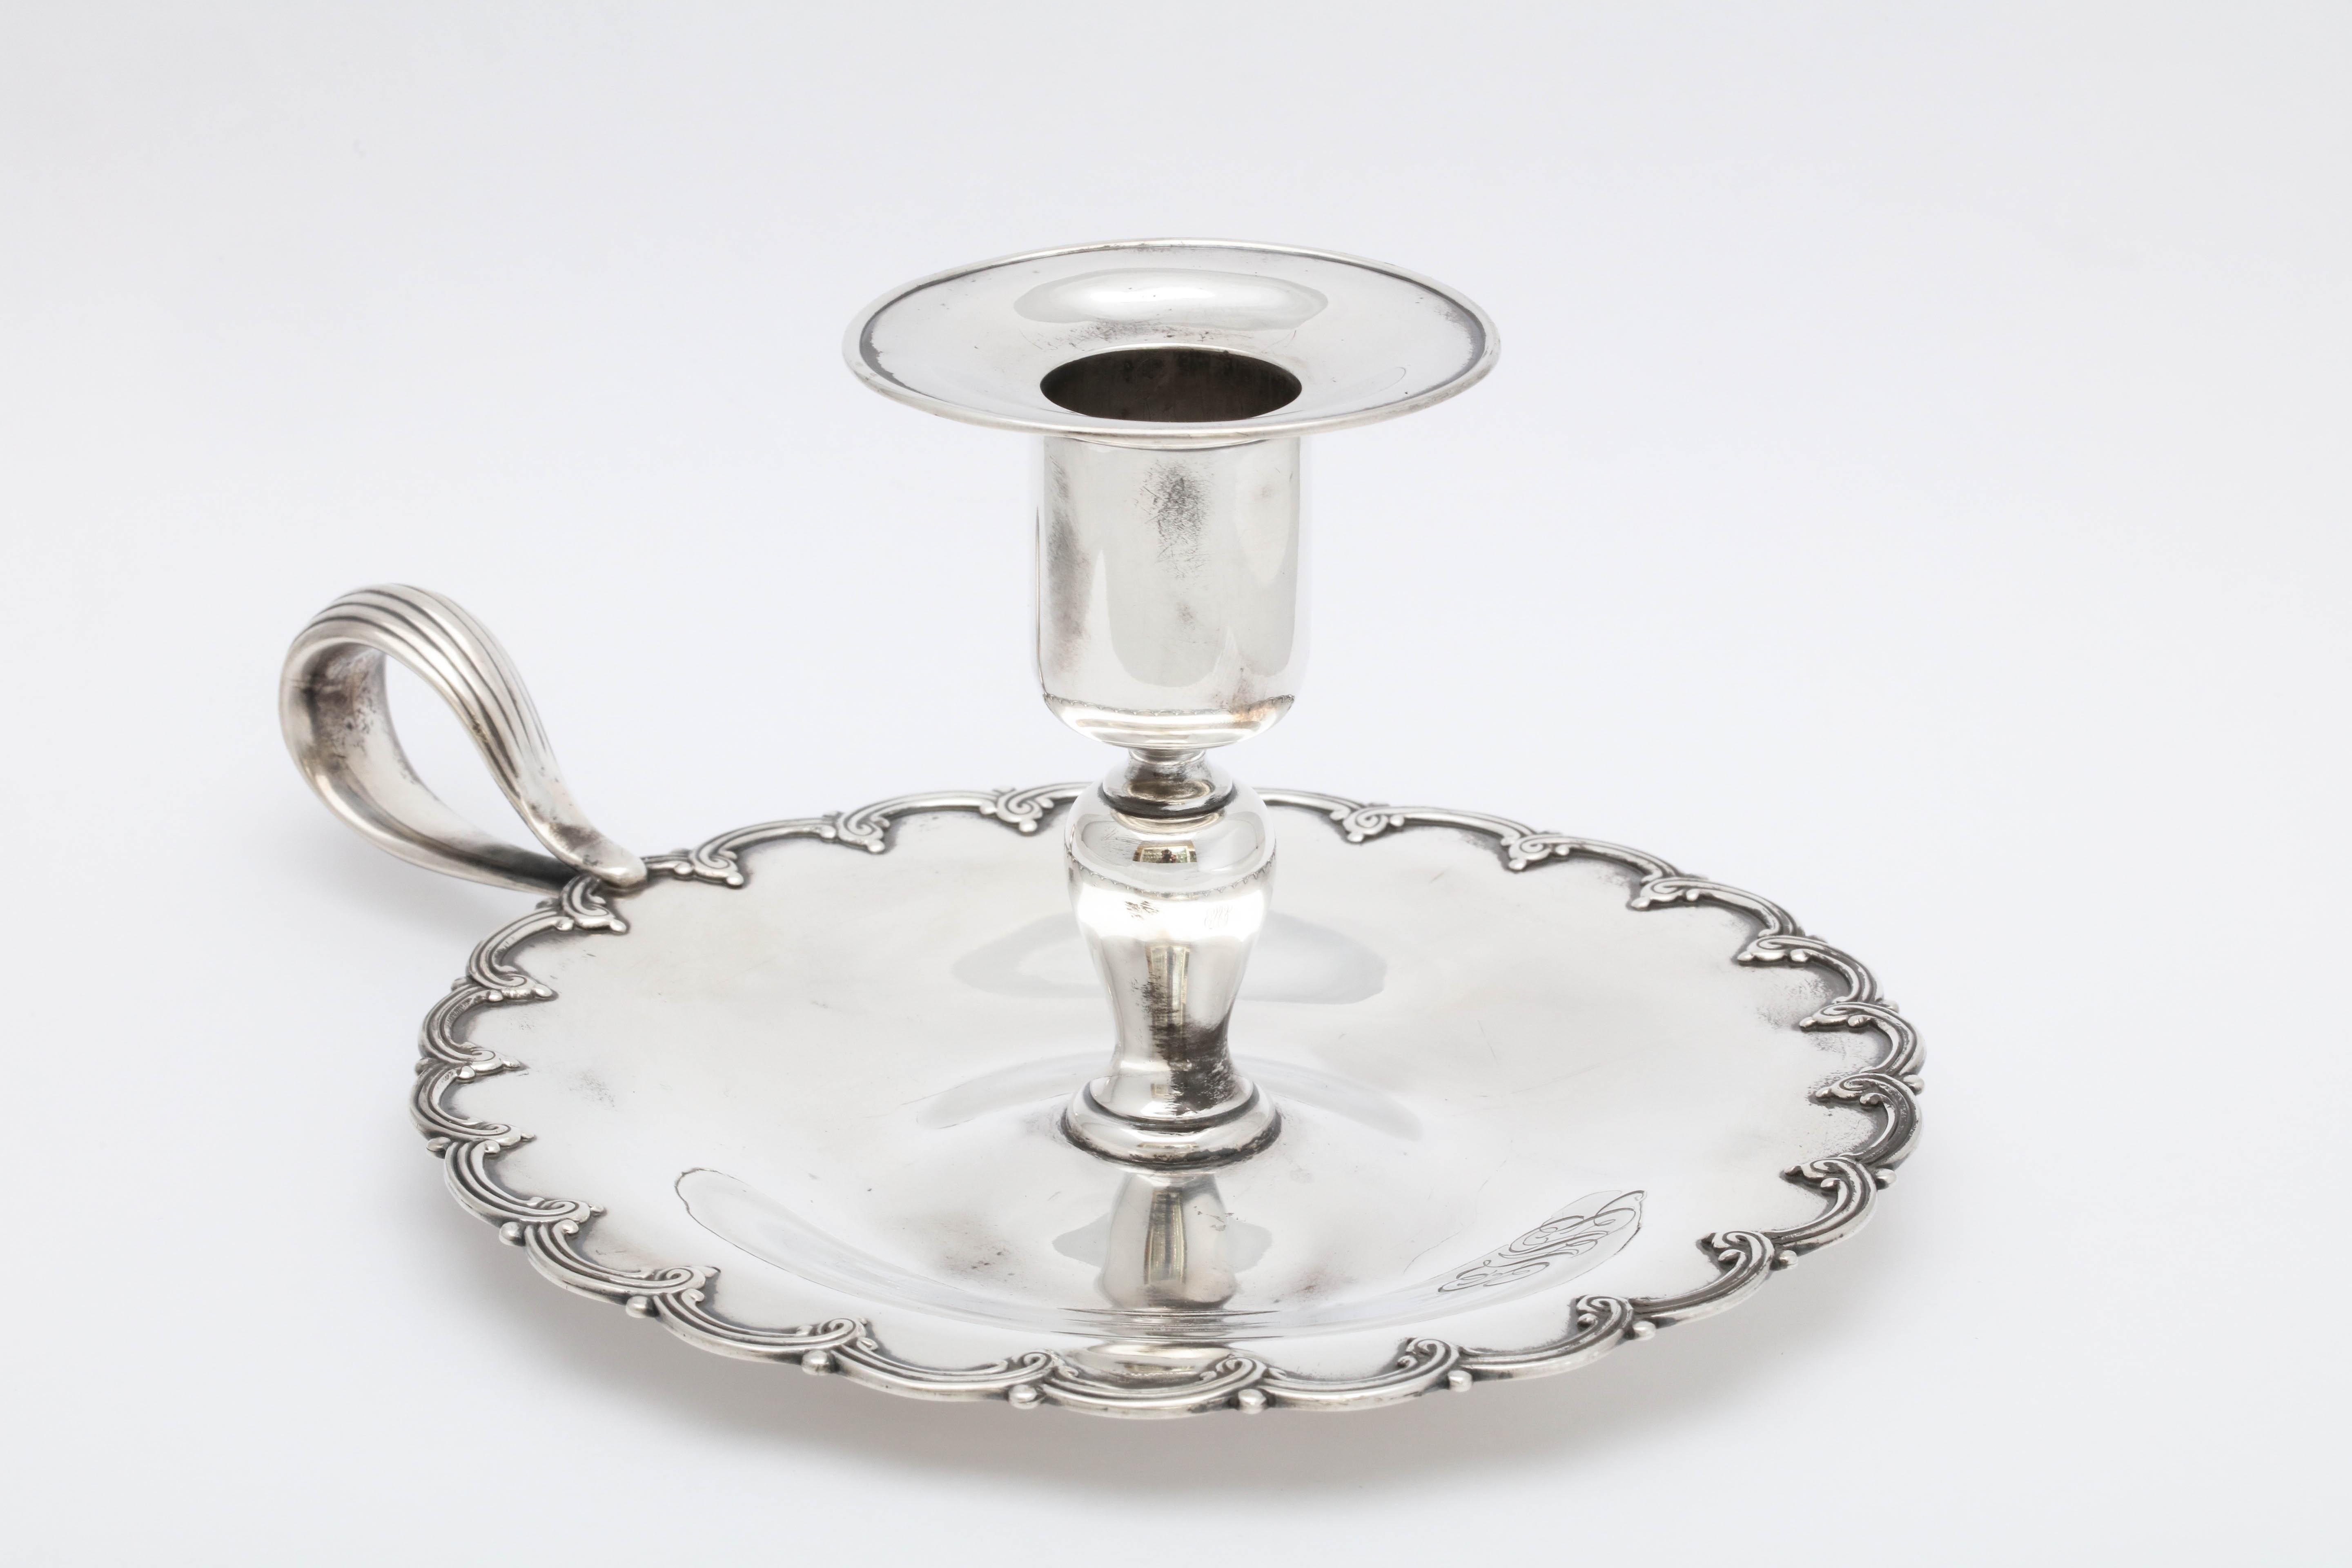 Edwardian, sterling silver chamber stick, Tiffany and Company, New York, inventory marked for 1902-1903. Measures 4 inches high x 5 1/2 inches in diameter x 7 1/4 inches across from handle to outer edge. Weighs 6.255 troy ounces. Scalloped border.